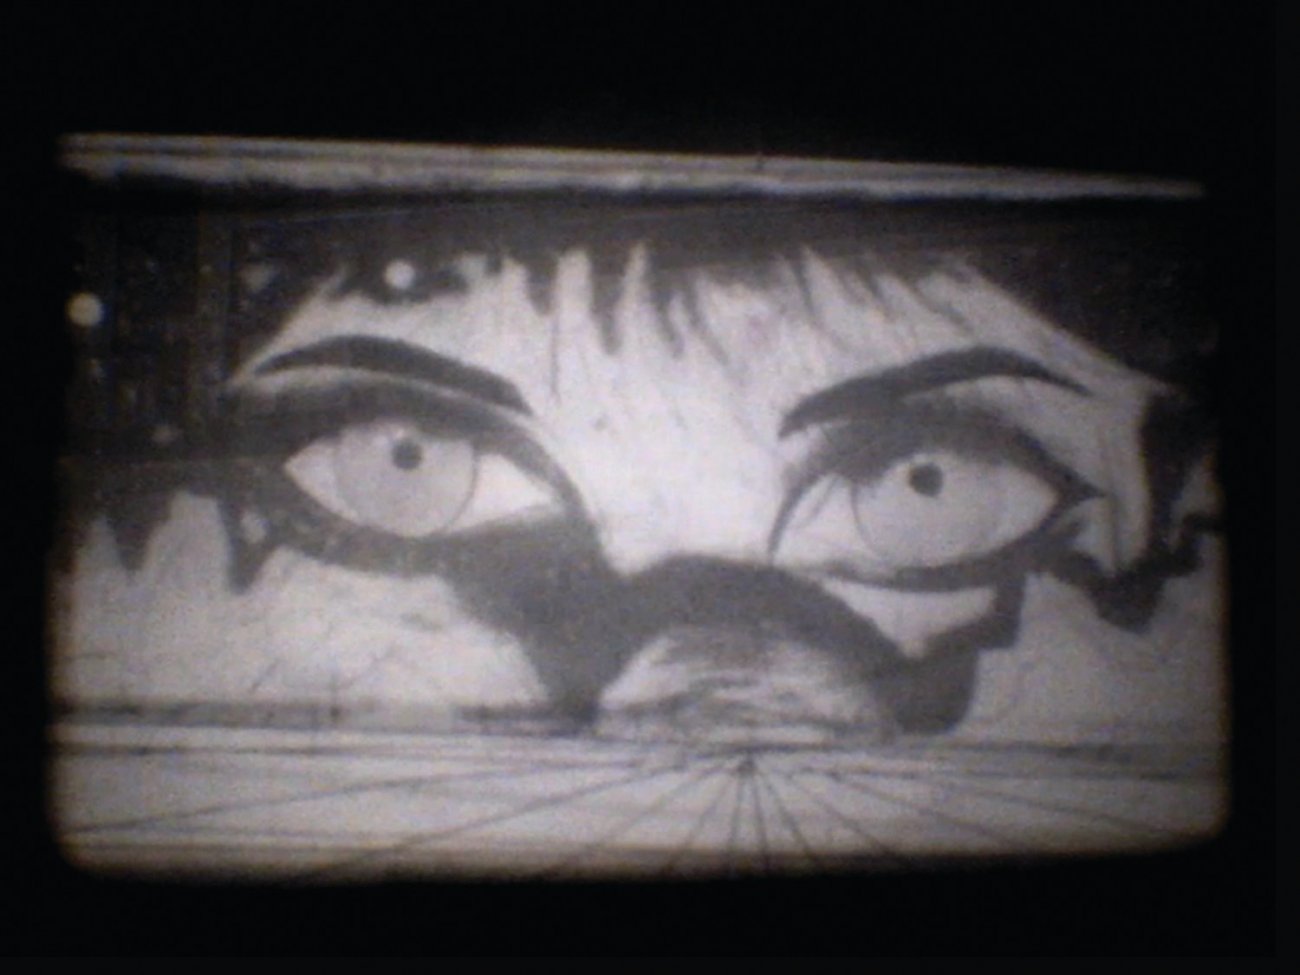 Black and white film still showing animated eyes 